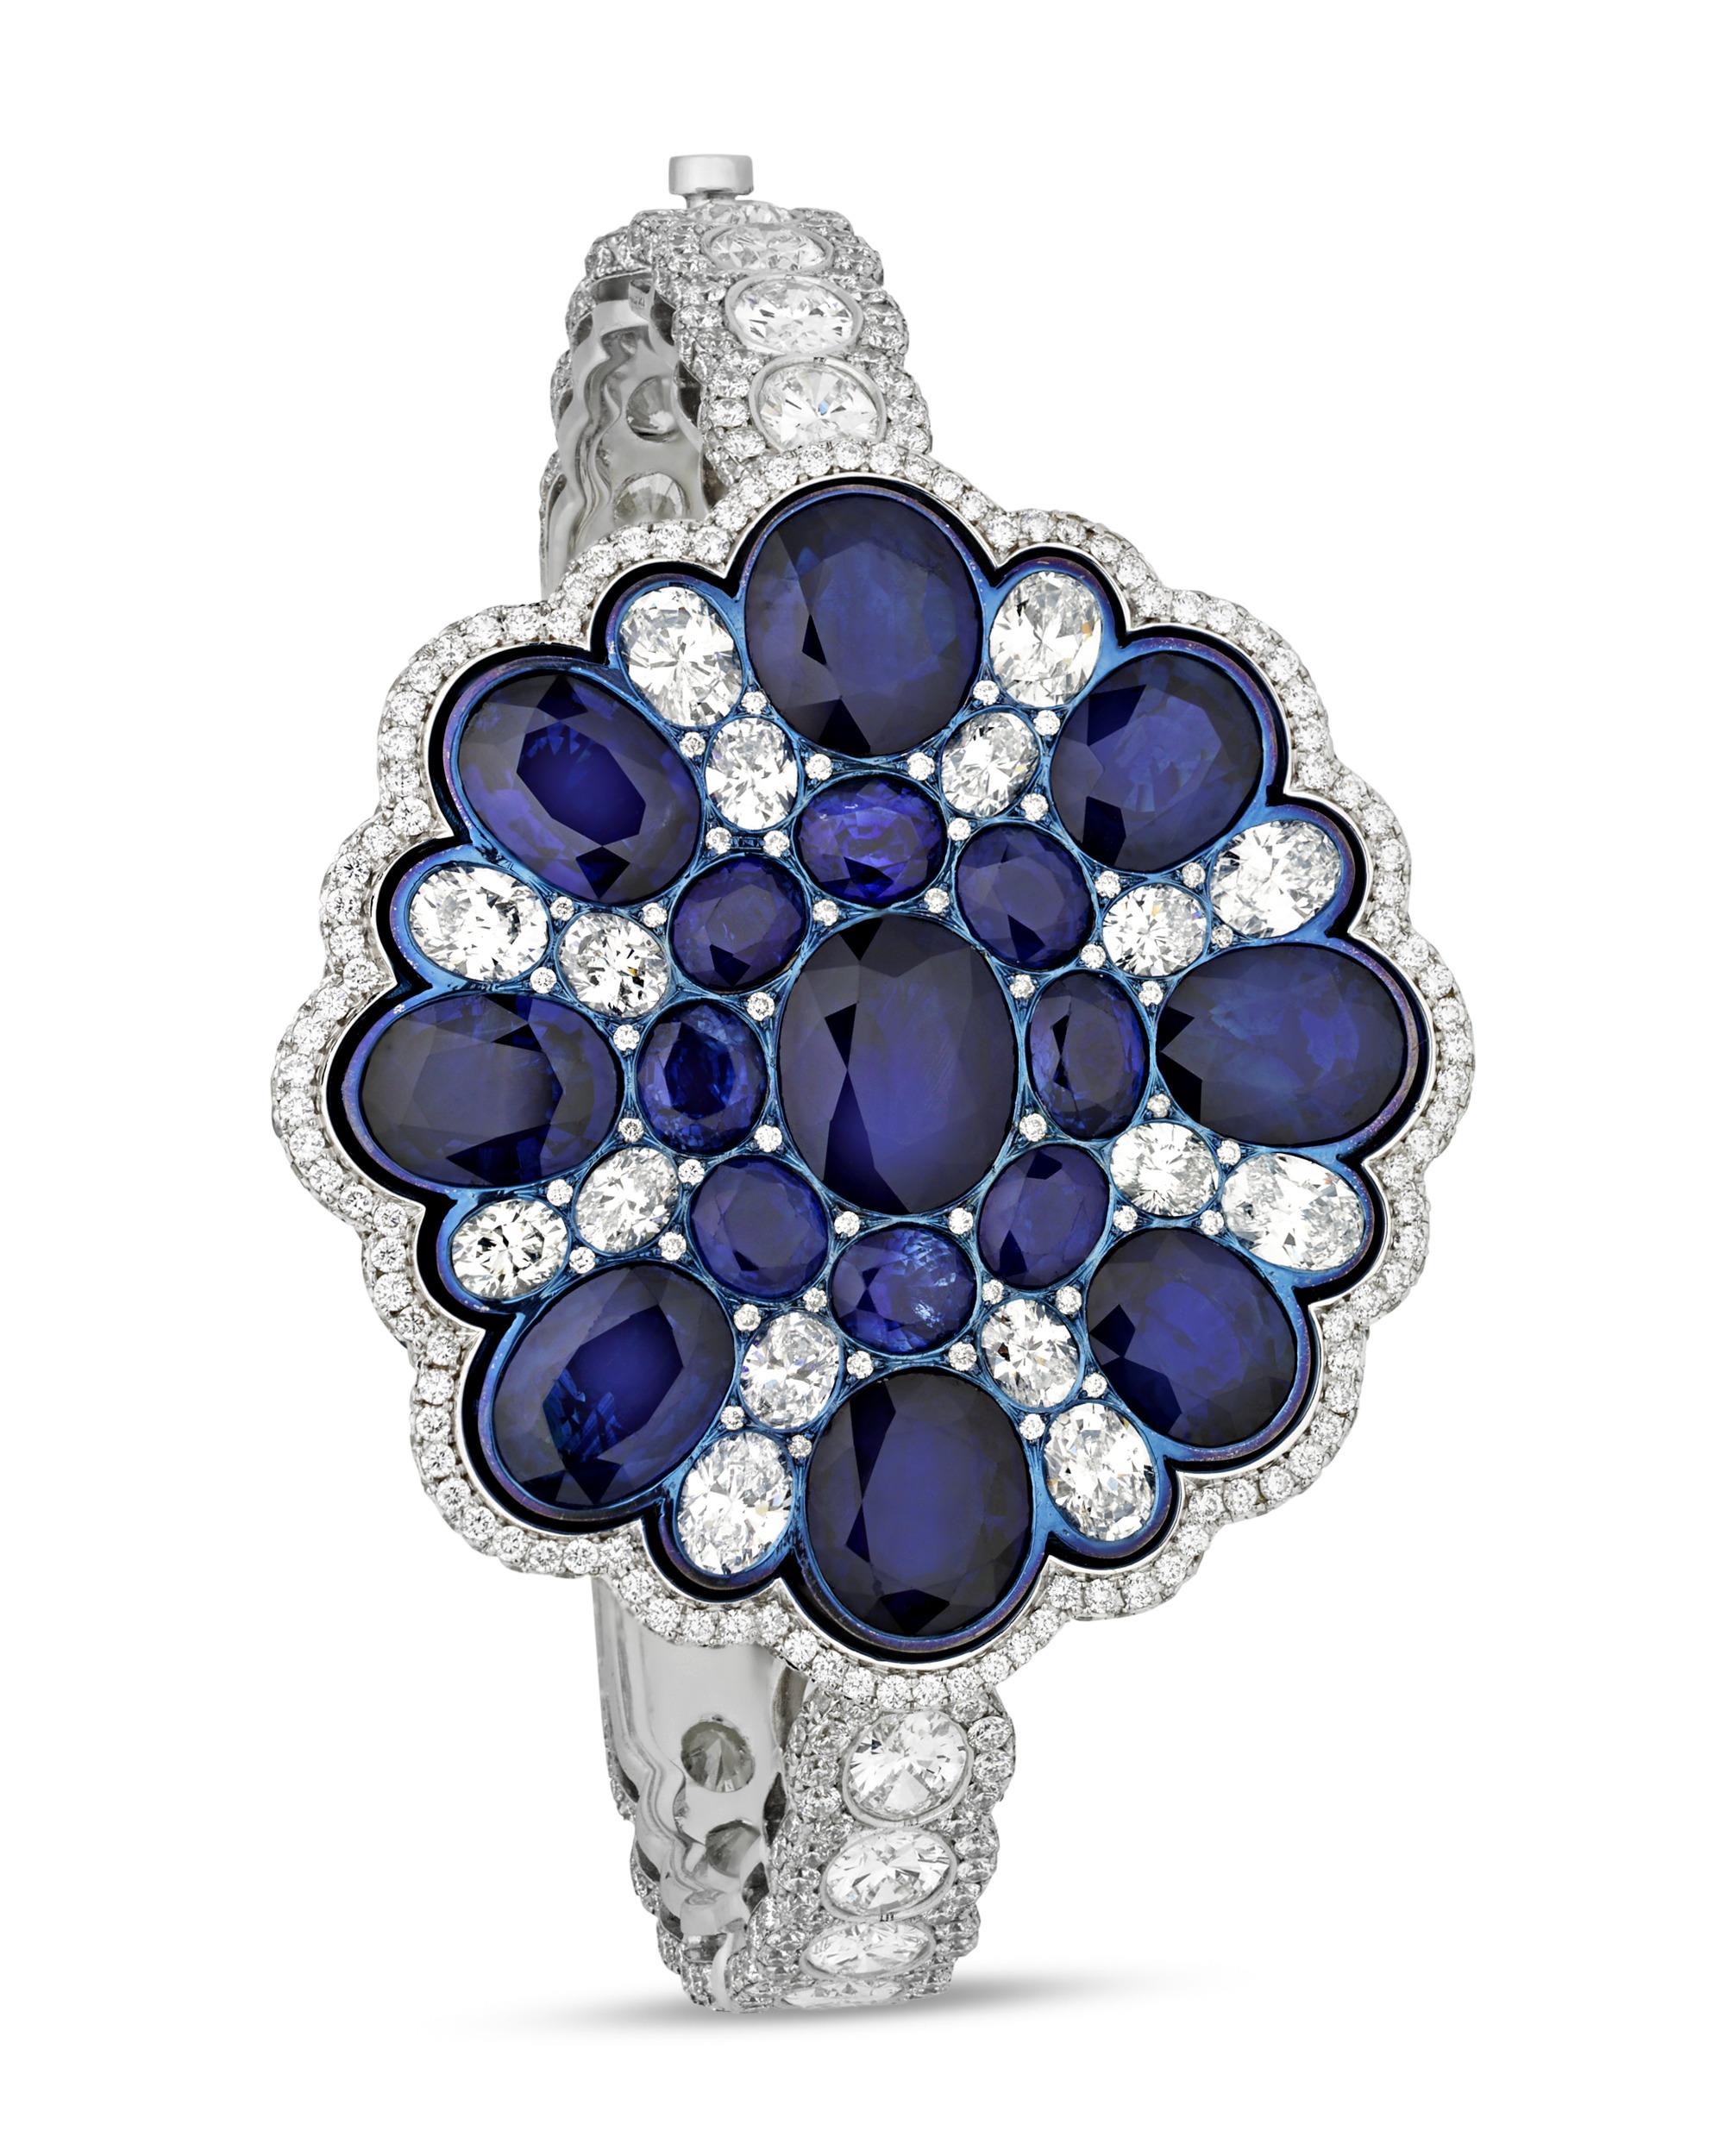 This stunning bangle bracelet is a symphony of sapphires. Featuring nine large sapphires totaling 27.29 carats, it is also adorned with one hundred smaller sapphires weighing 6.00 carats. White diamonds totaling 21.98 carats accentuate the